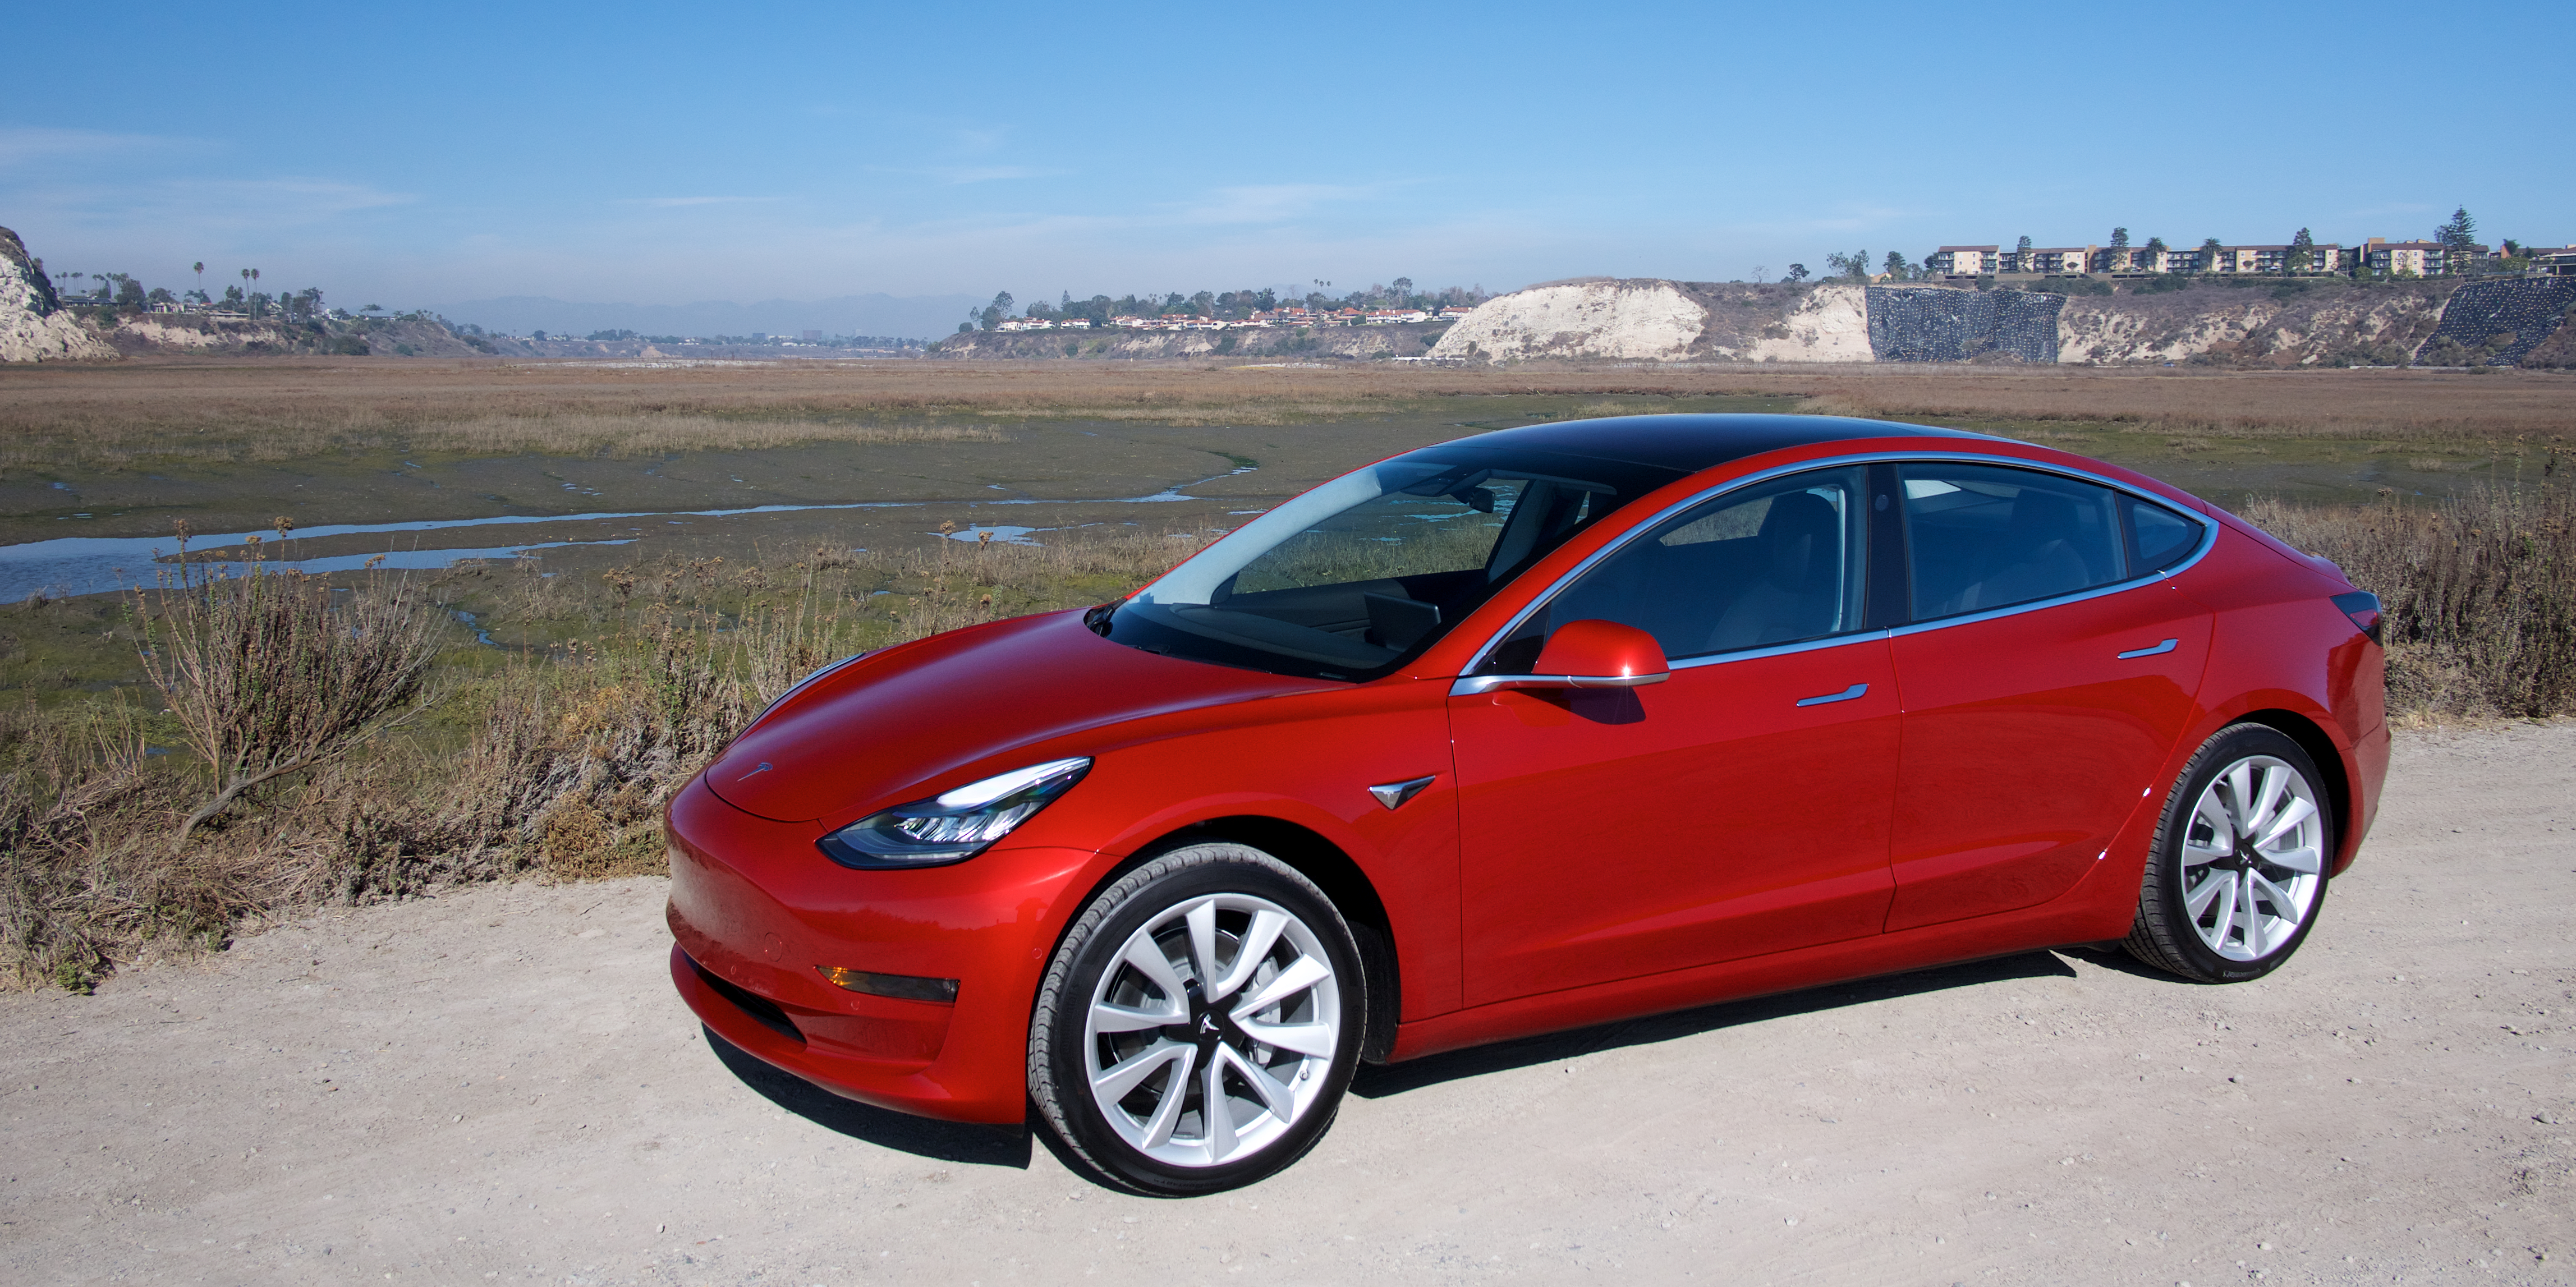 Tesla Model 3 first drive: Yes, it's a real car, and a pretty good one too